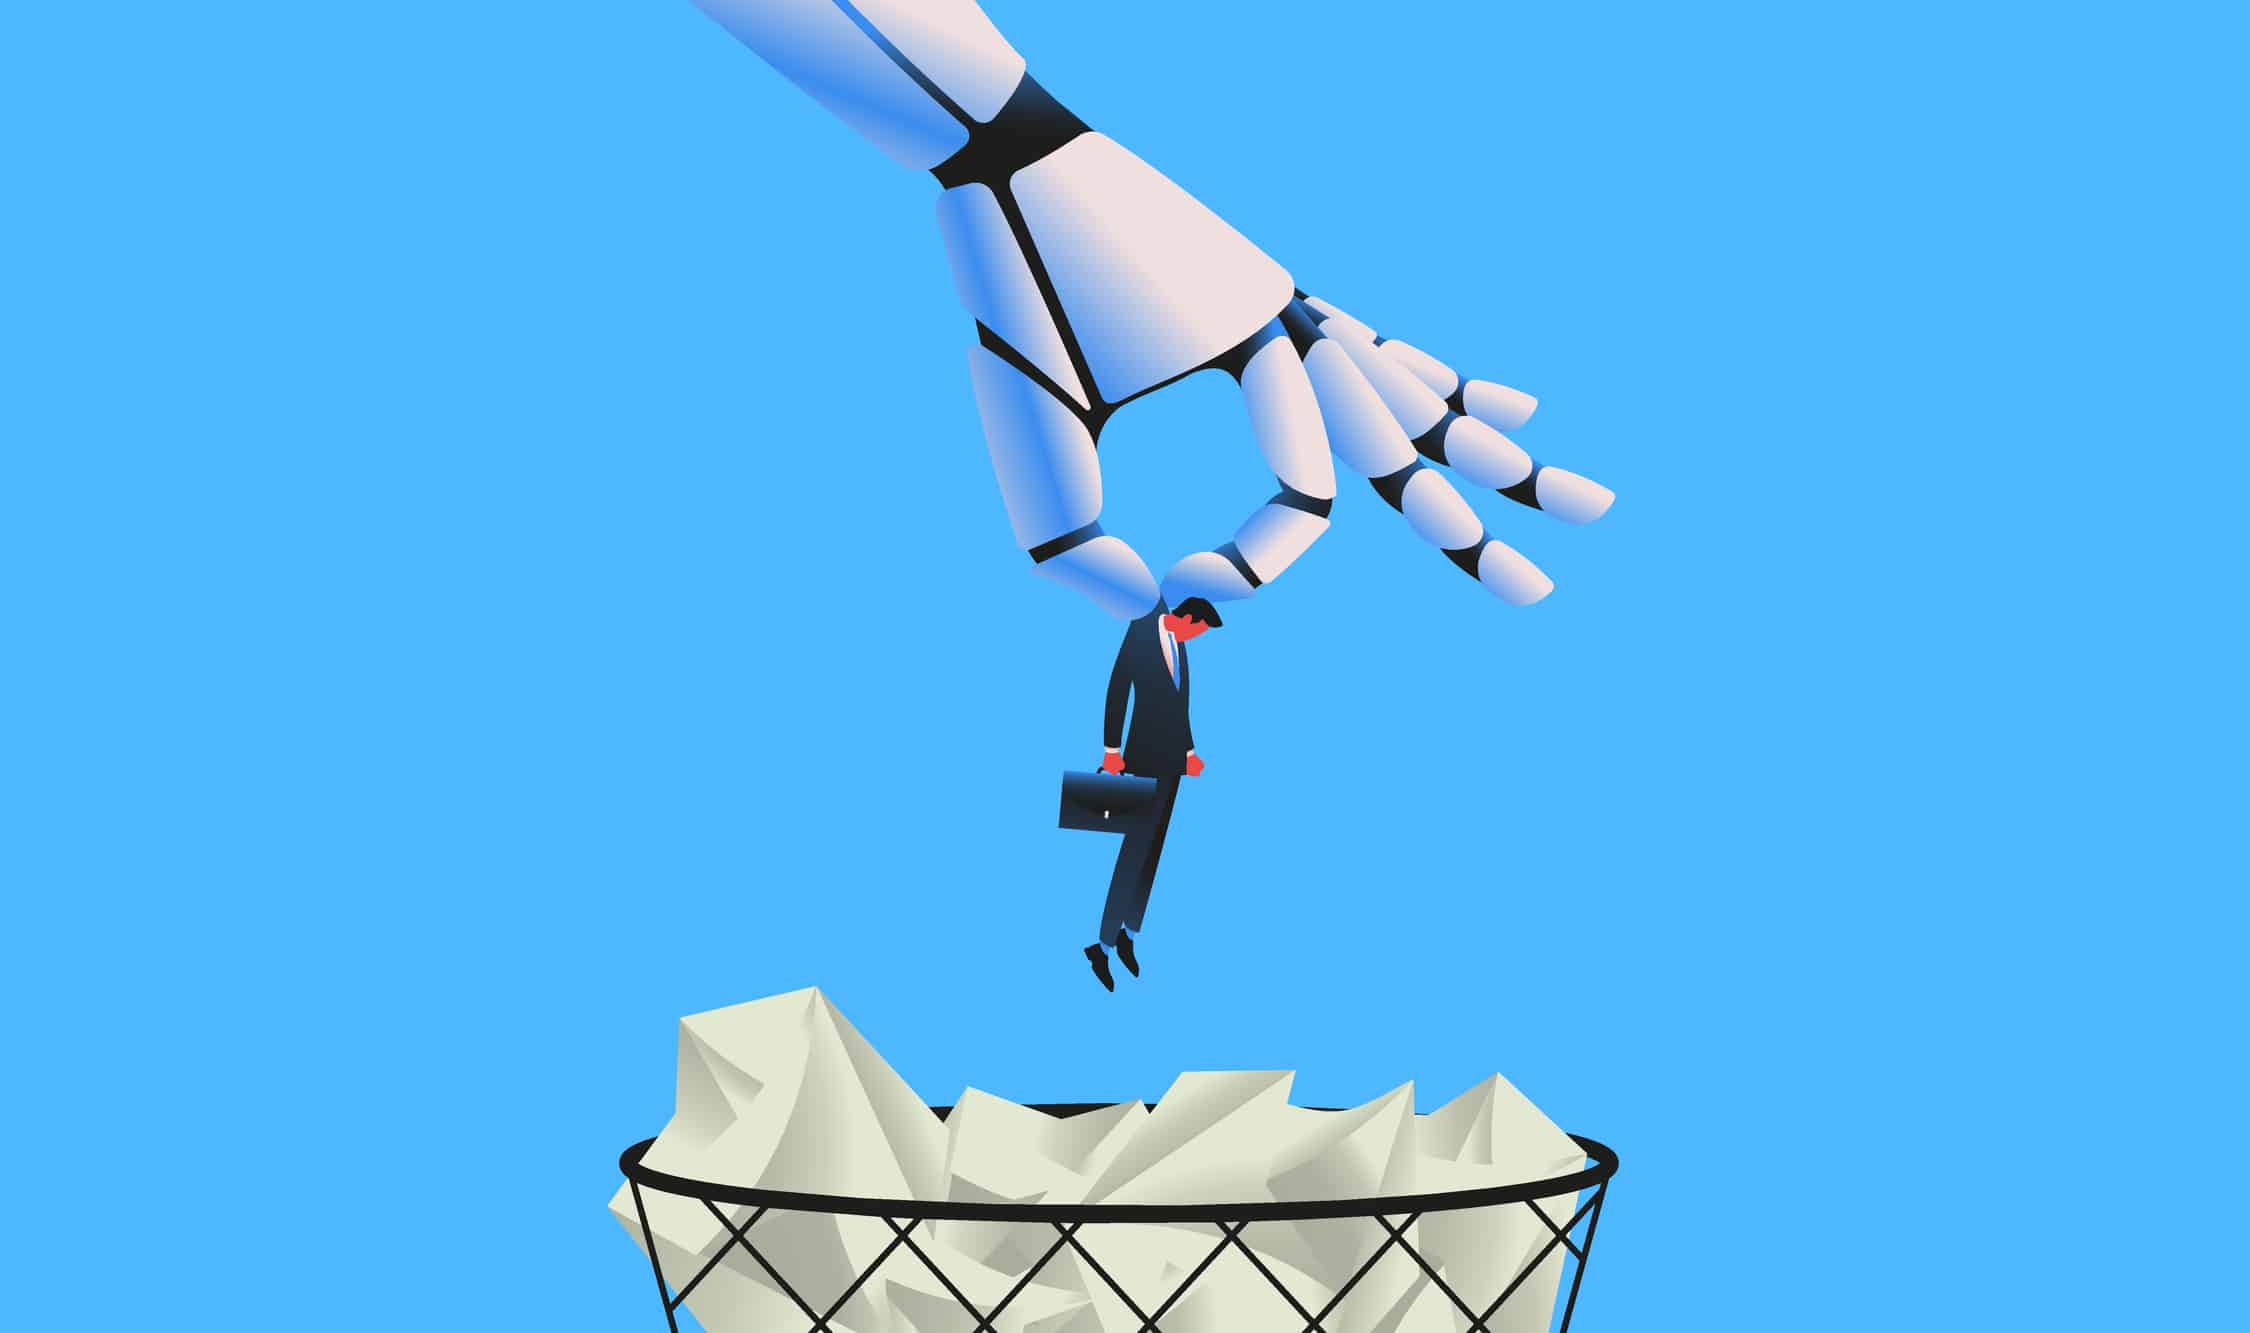 Giant robot throwing man in a trash can as metaphor for "AI at work: will AI replace or support us?"